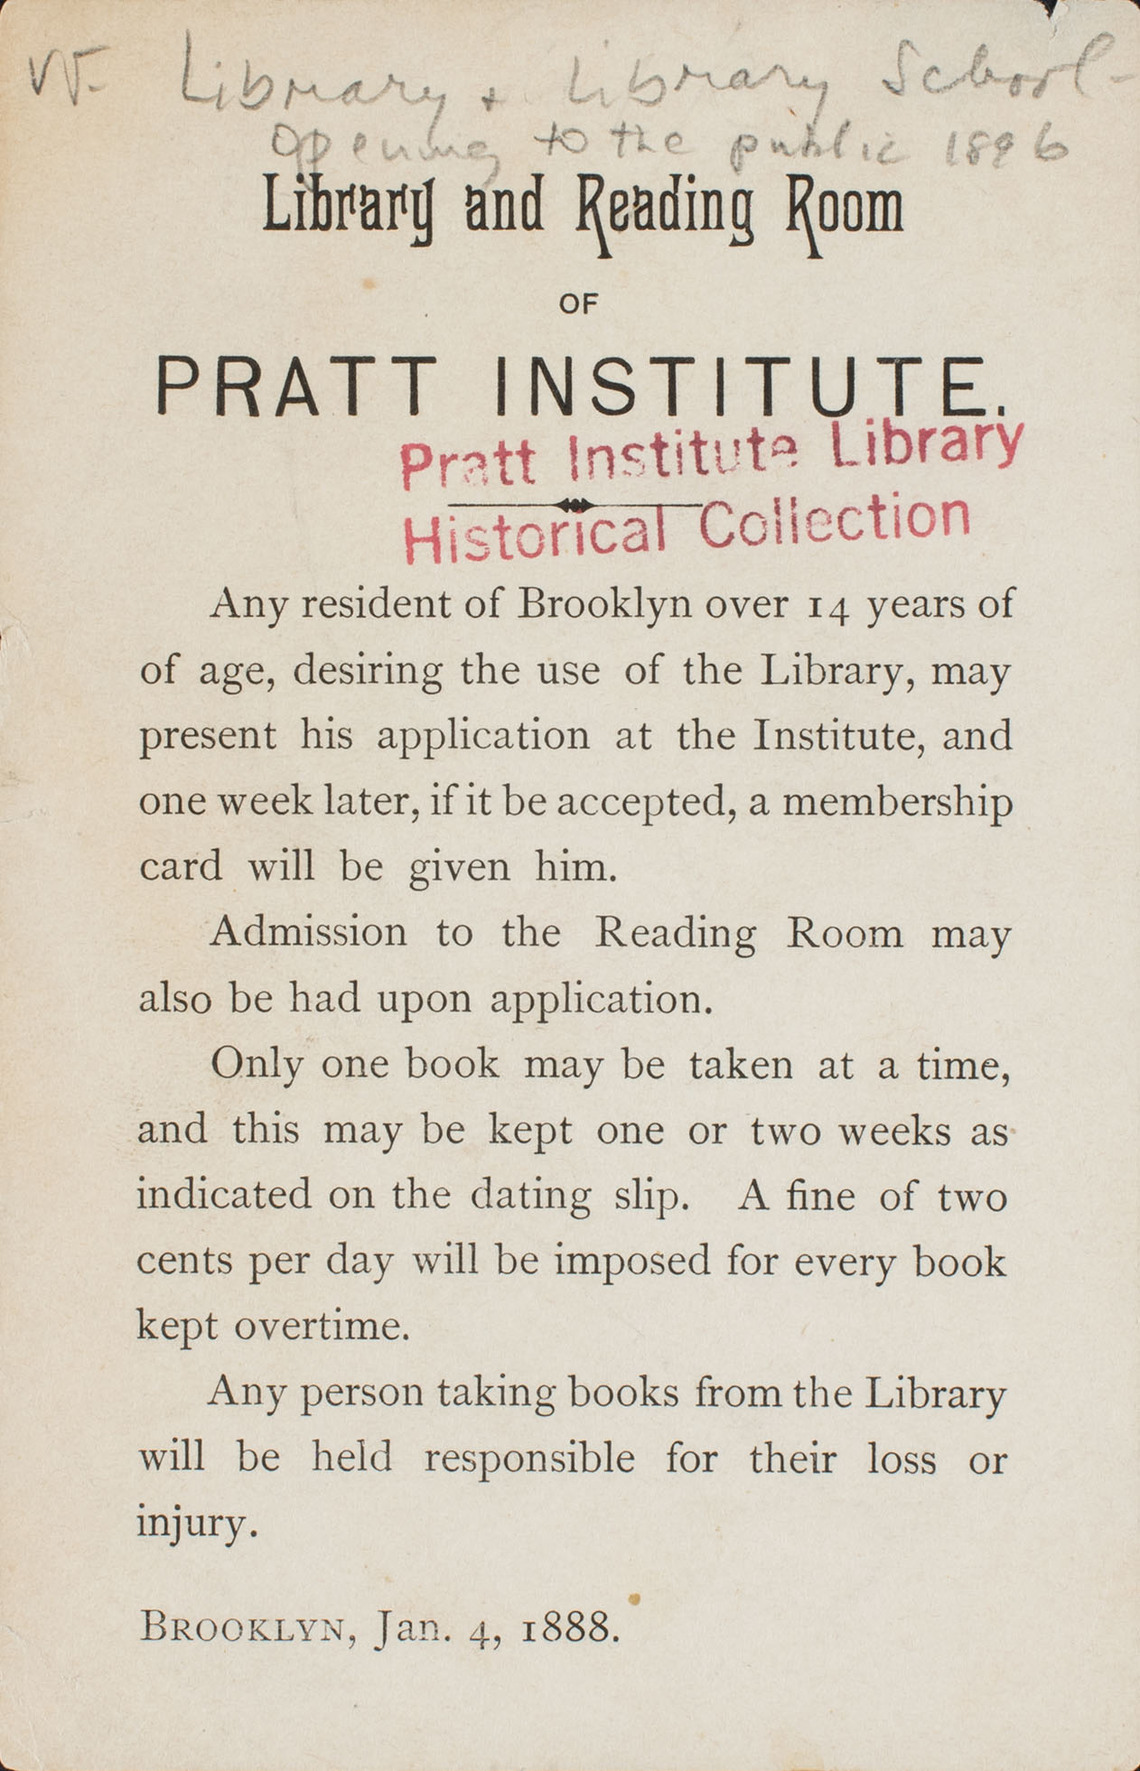 Library and Reading Room of Pratt Institute